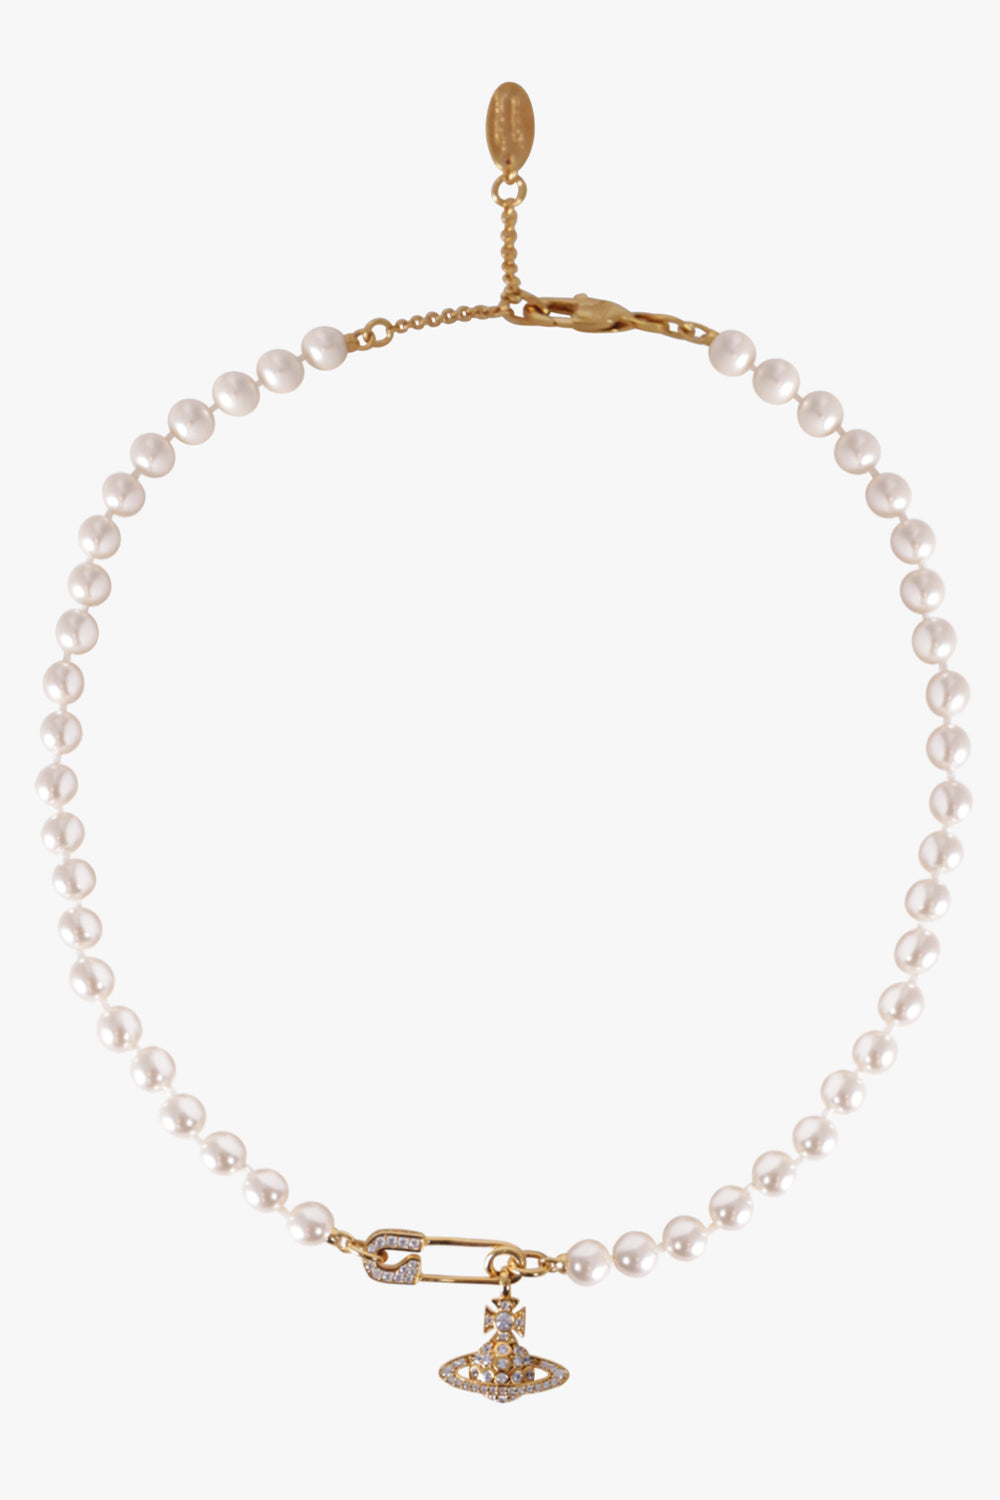 VIVIENNE WESTWOOD JEWELLRY GOLD / GOLD LUCRECE PEARL NECKLACE | CREAM ROSE PEARL/GOLD